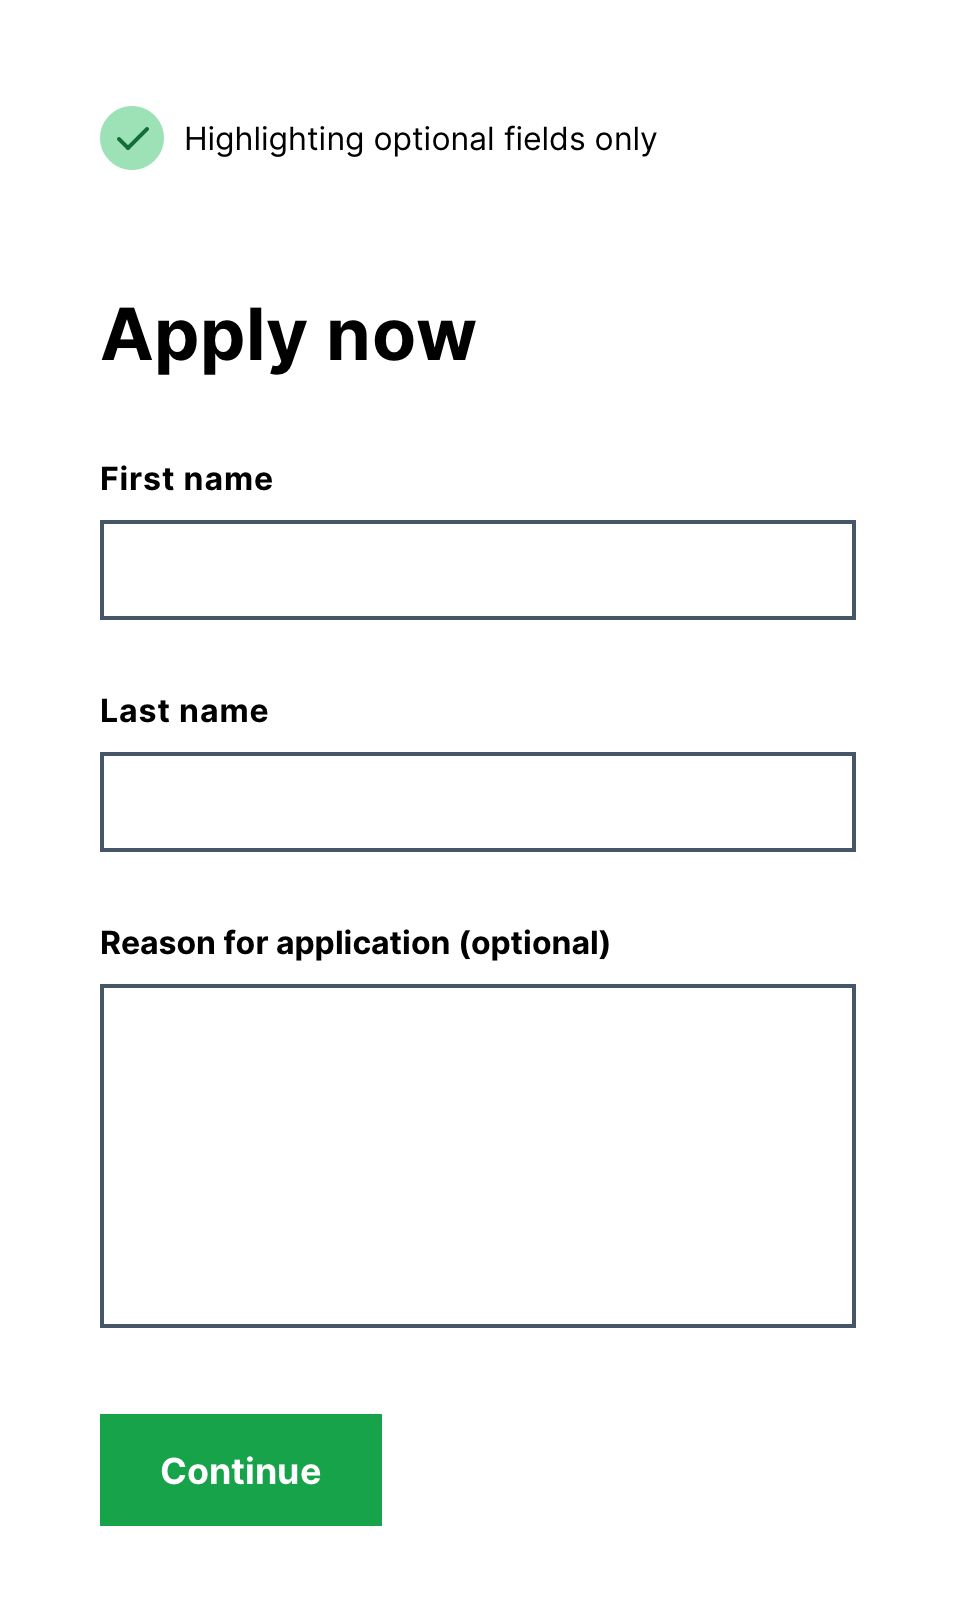 A form highlighting optional fields only